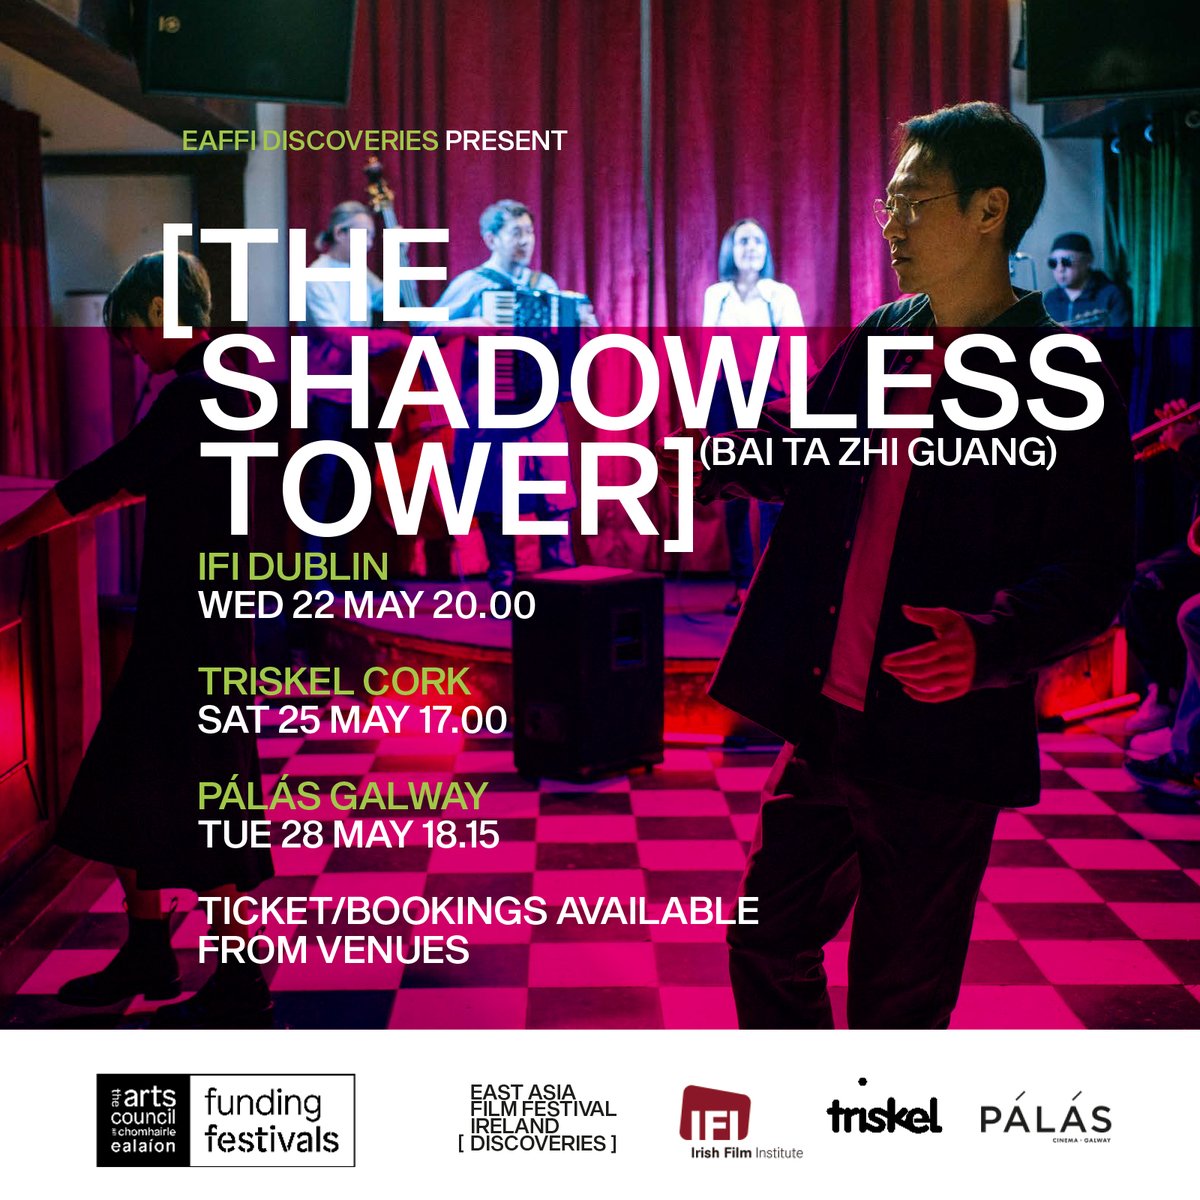 'Gu Wentong, a middle-aged food critic, wanders through the local eateries of vibrant Beijing with young & dynamic photographer colleague Oyang.' Radiant & wistful THE SHADOWLESS TOWER screens this month @EastAsiaFFIrl Book directly with venues: @IFI_Dub @TriskelCork @PalasGalway